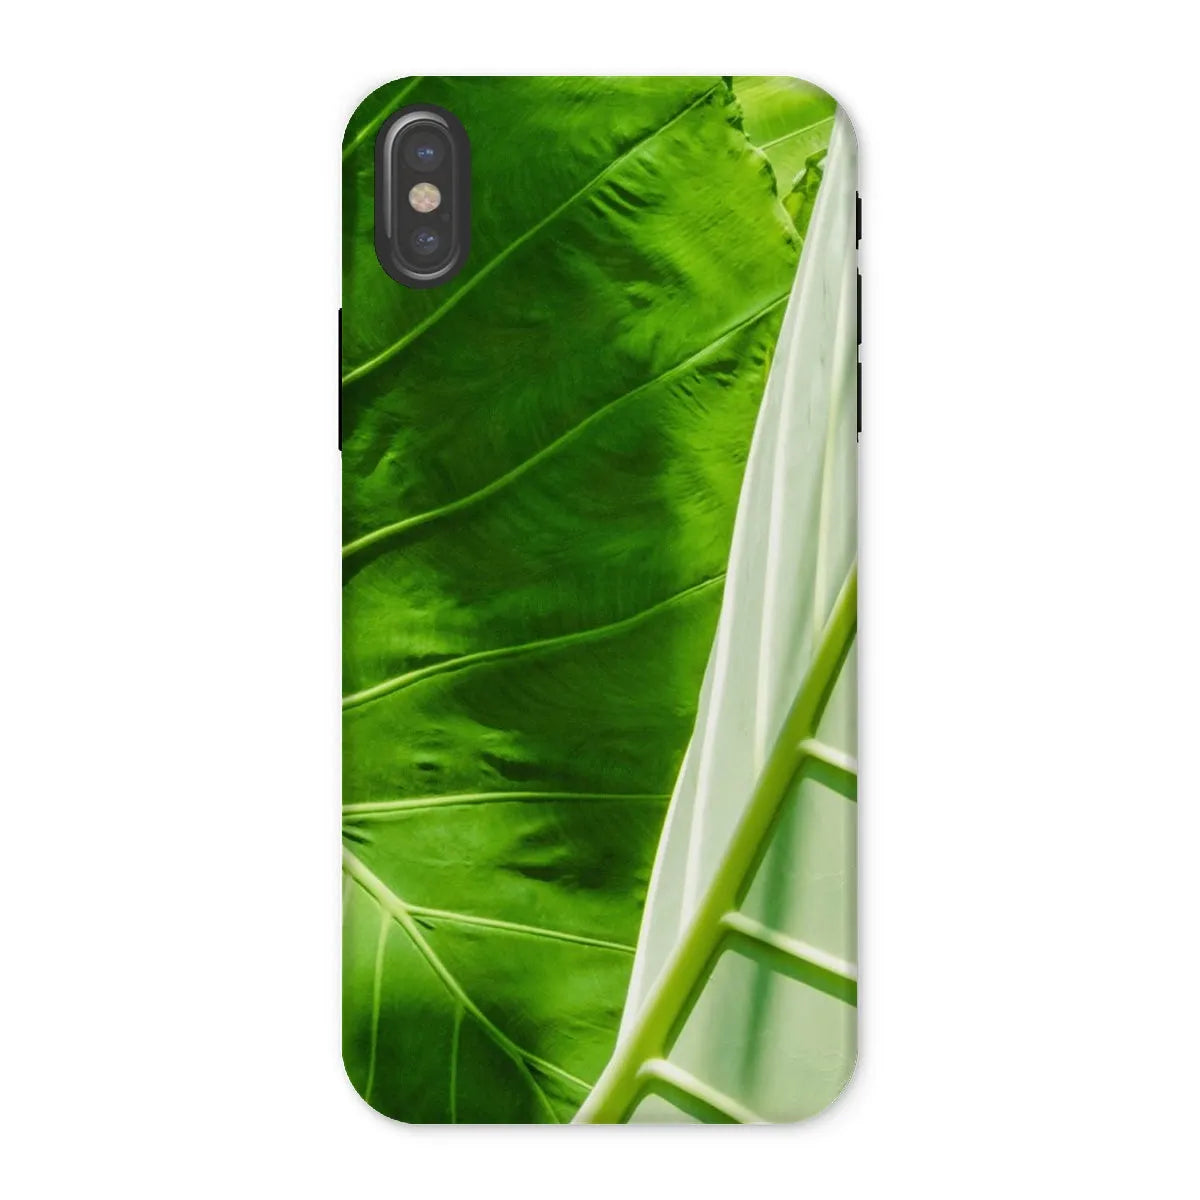 Clash Of The Hulks Tough Phone Case - Iphone x / Matte - Mobile Phone Cases - Aesthetic Art